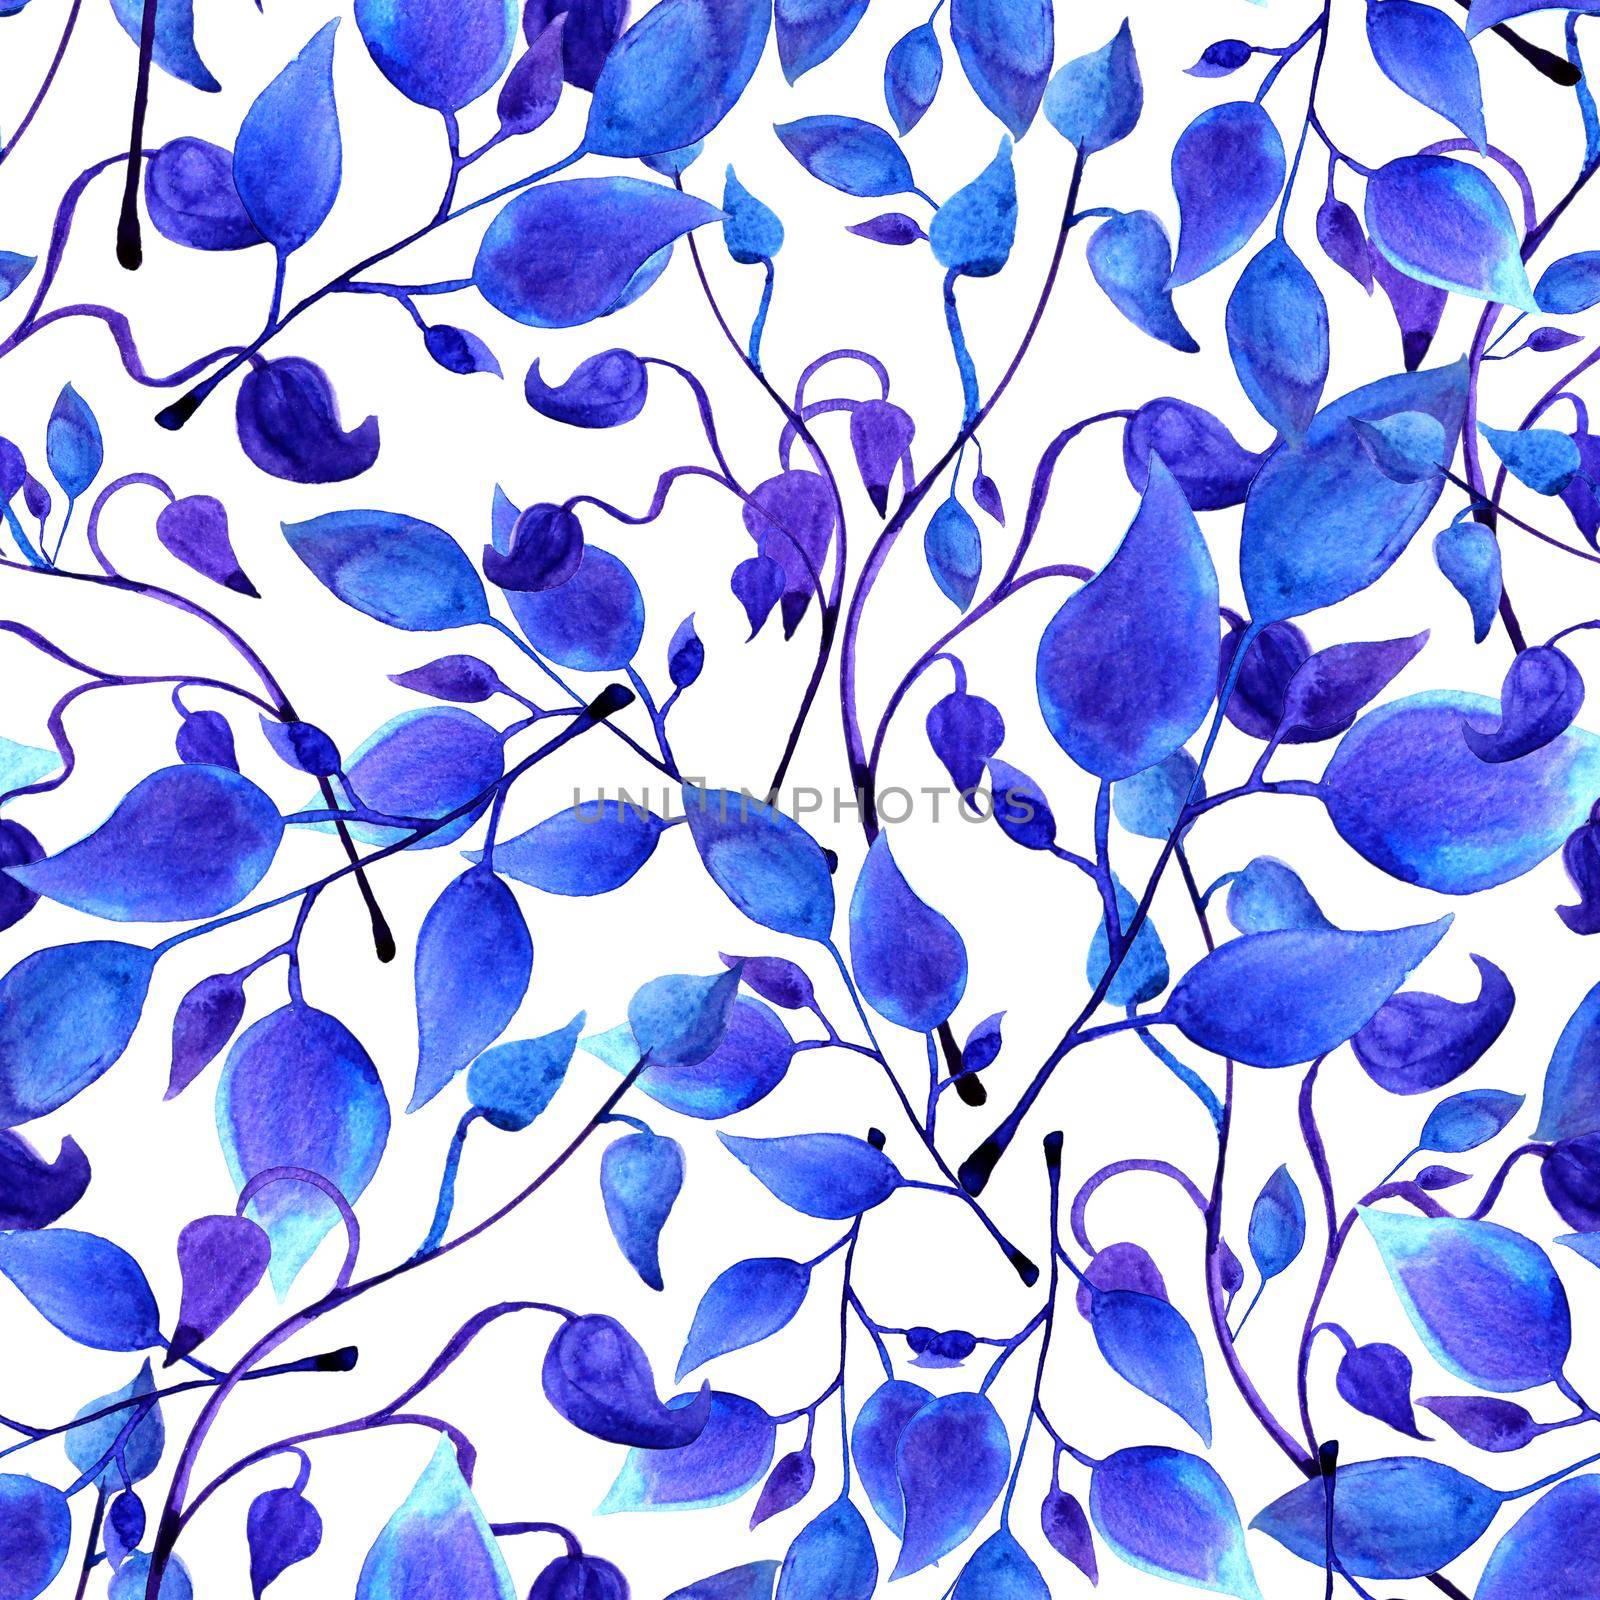 hand painted watercolor blue leaves seamless floral endless background. leaf pattern